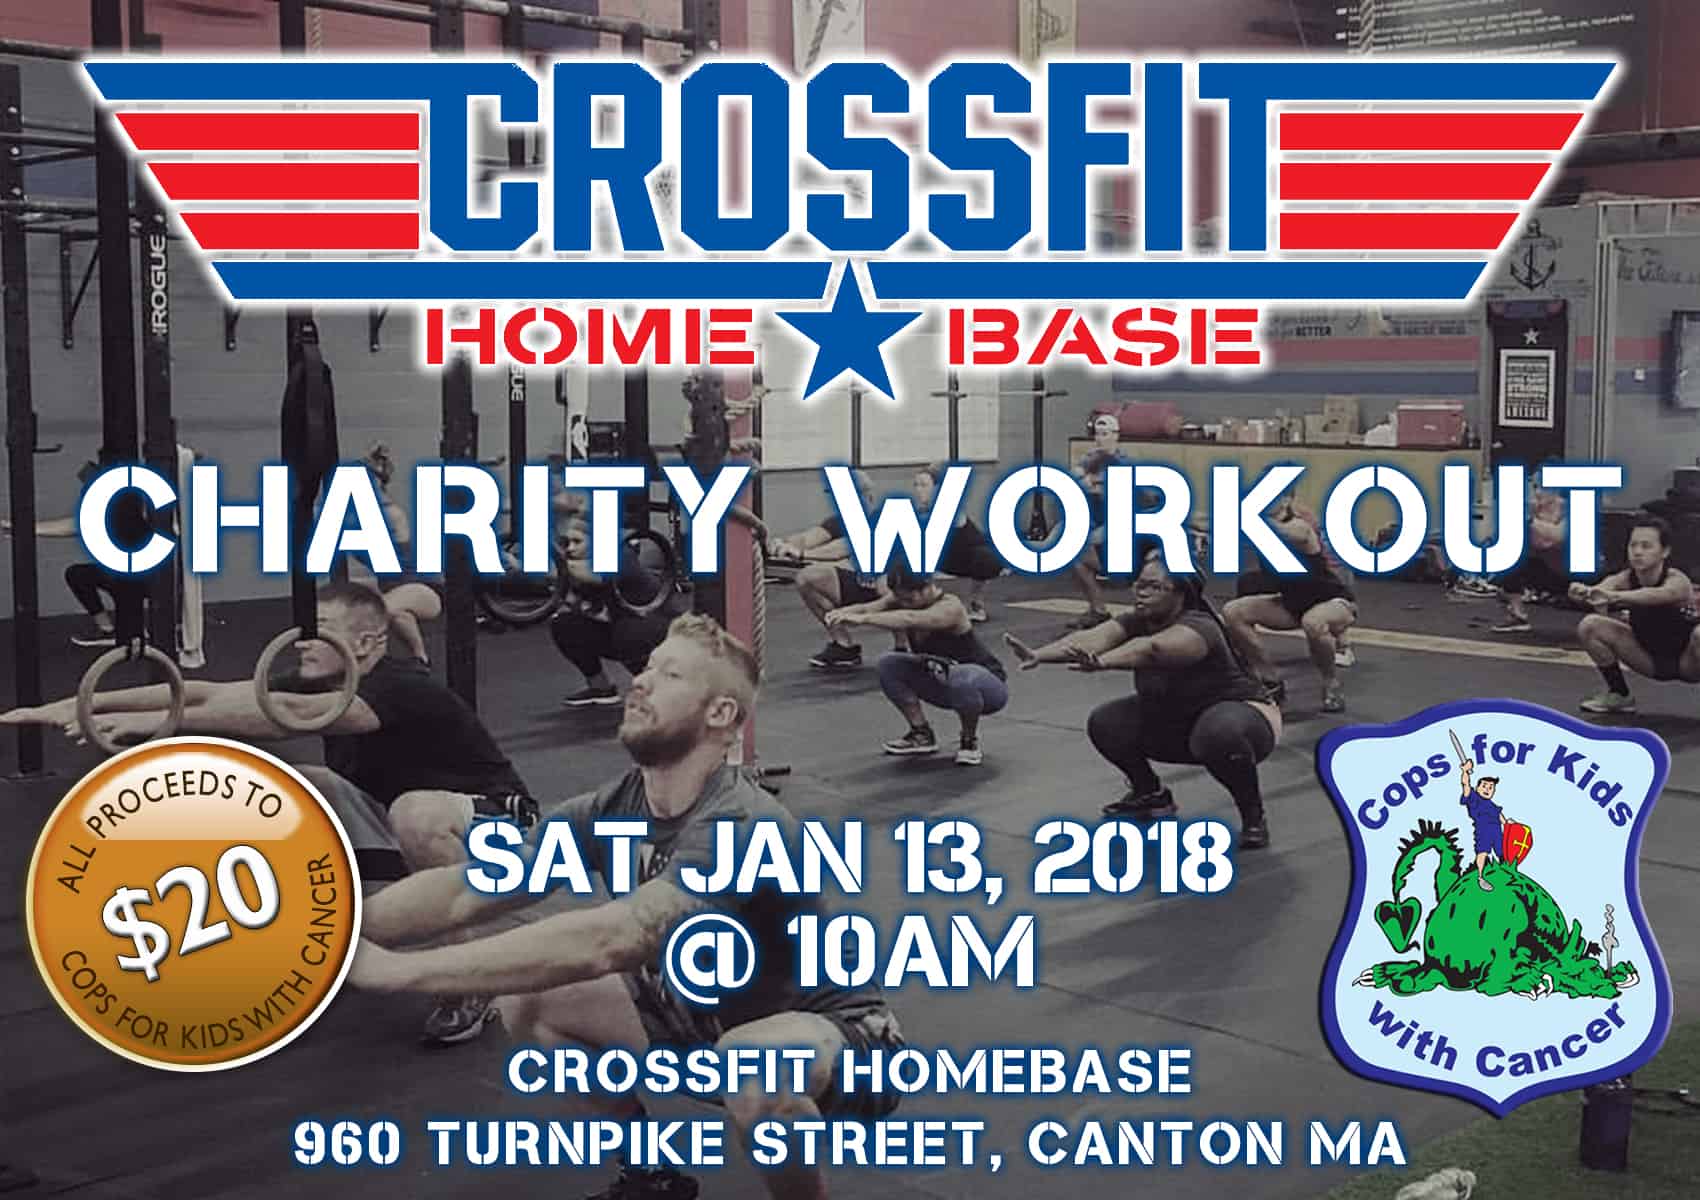 Crossfit for Cops for Kids with Cancer